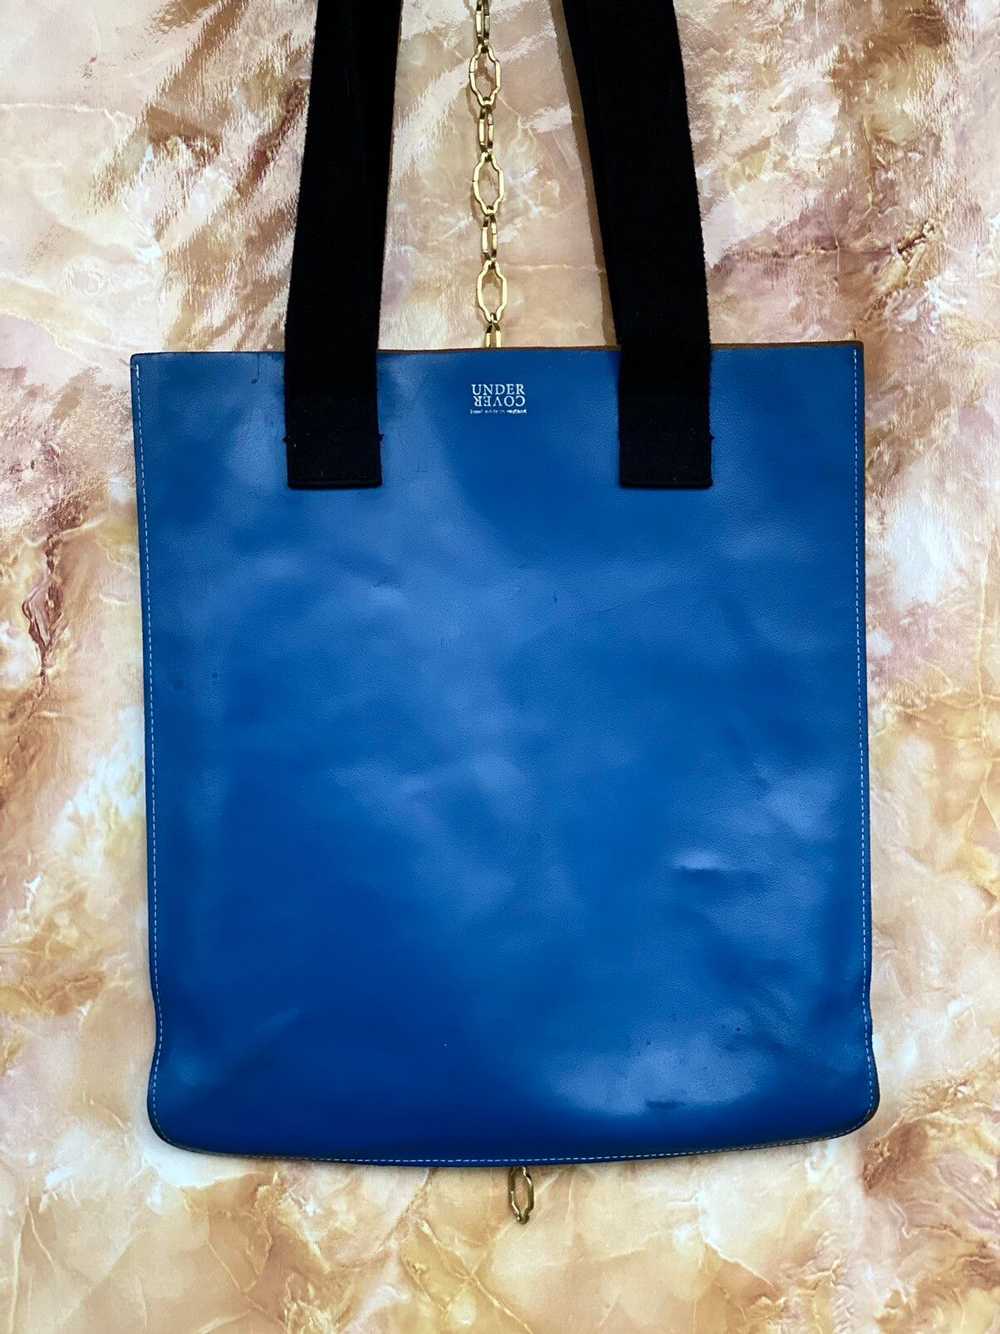 Undercover Undercover leather blue tote shoulder … - image 1